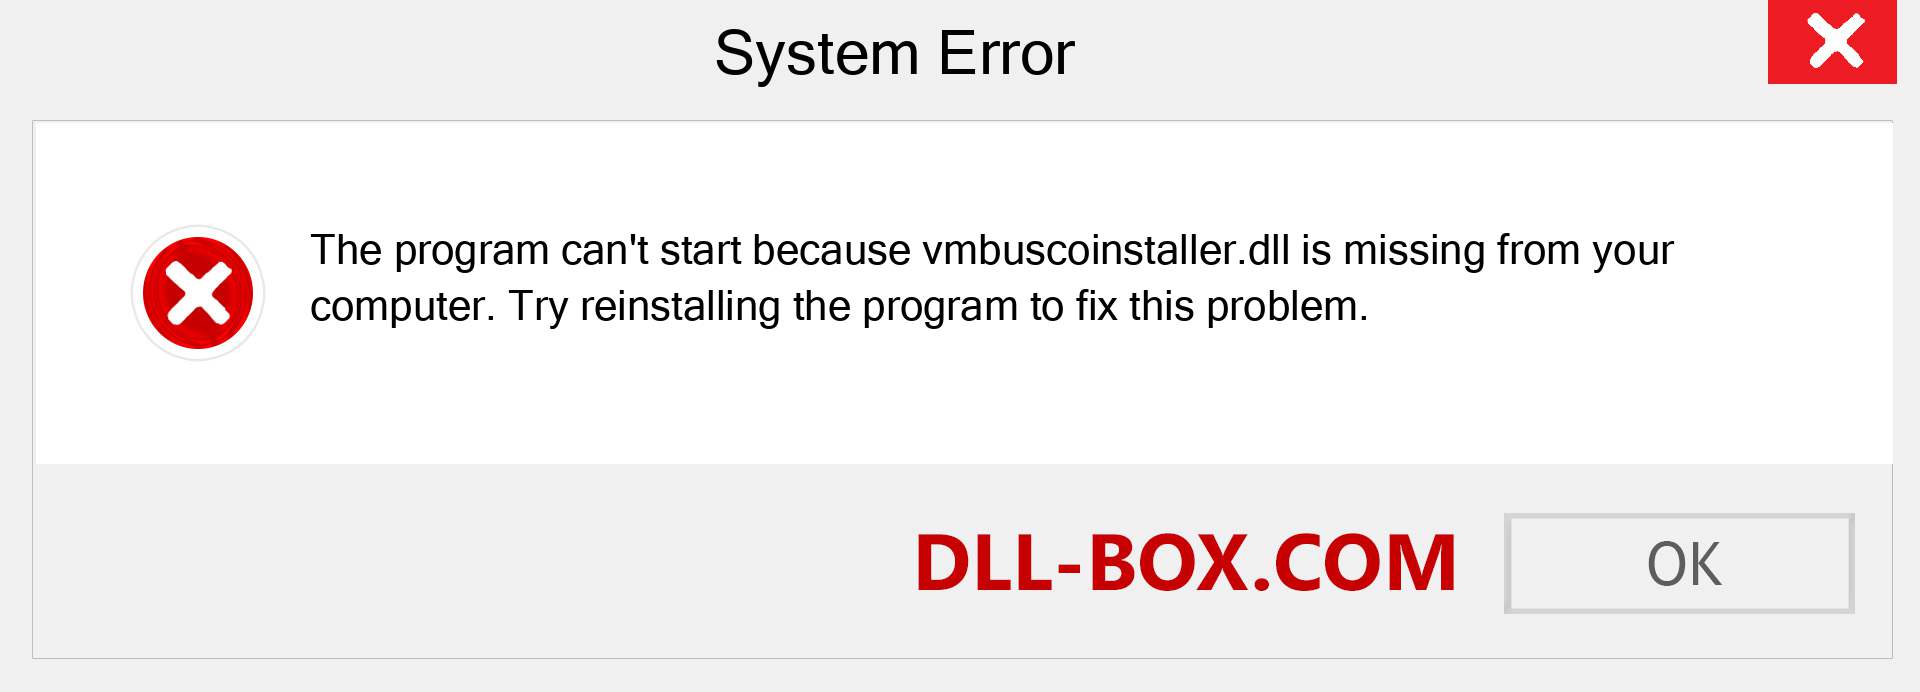  vmbuscoinstaller.dll file is missing?. Download for Windows 7, 8, 10 - Fix  vmbuscoinstaller dll Missing Error on Windows, photos, images